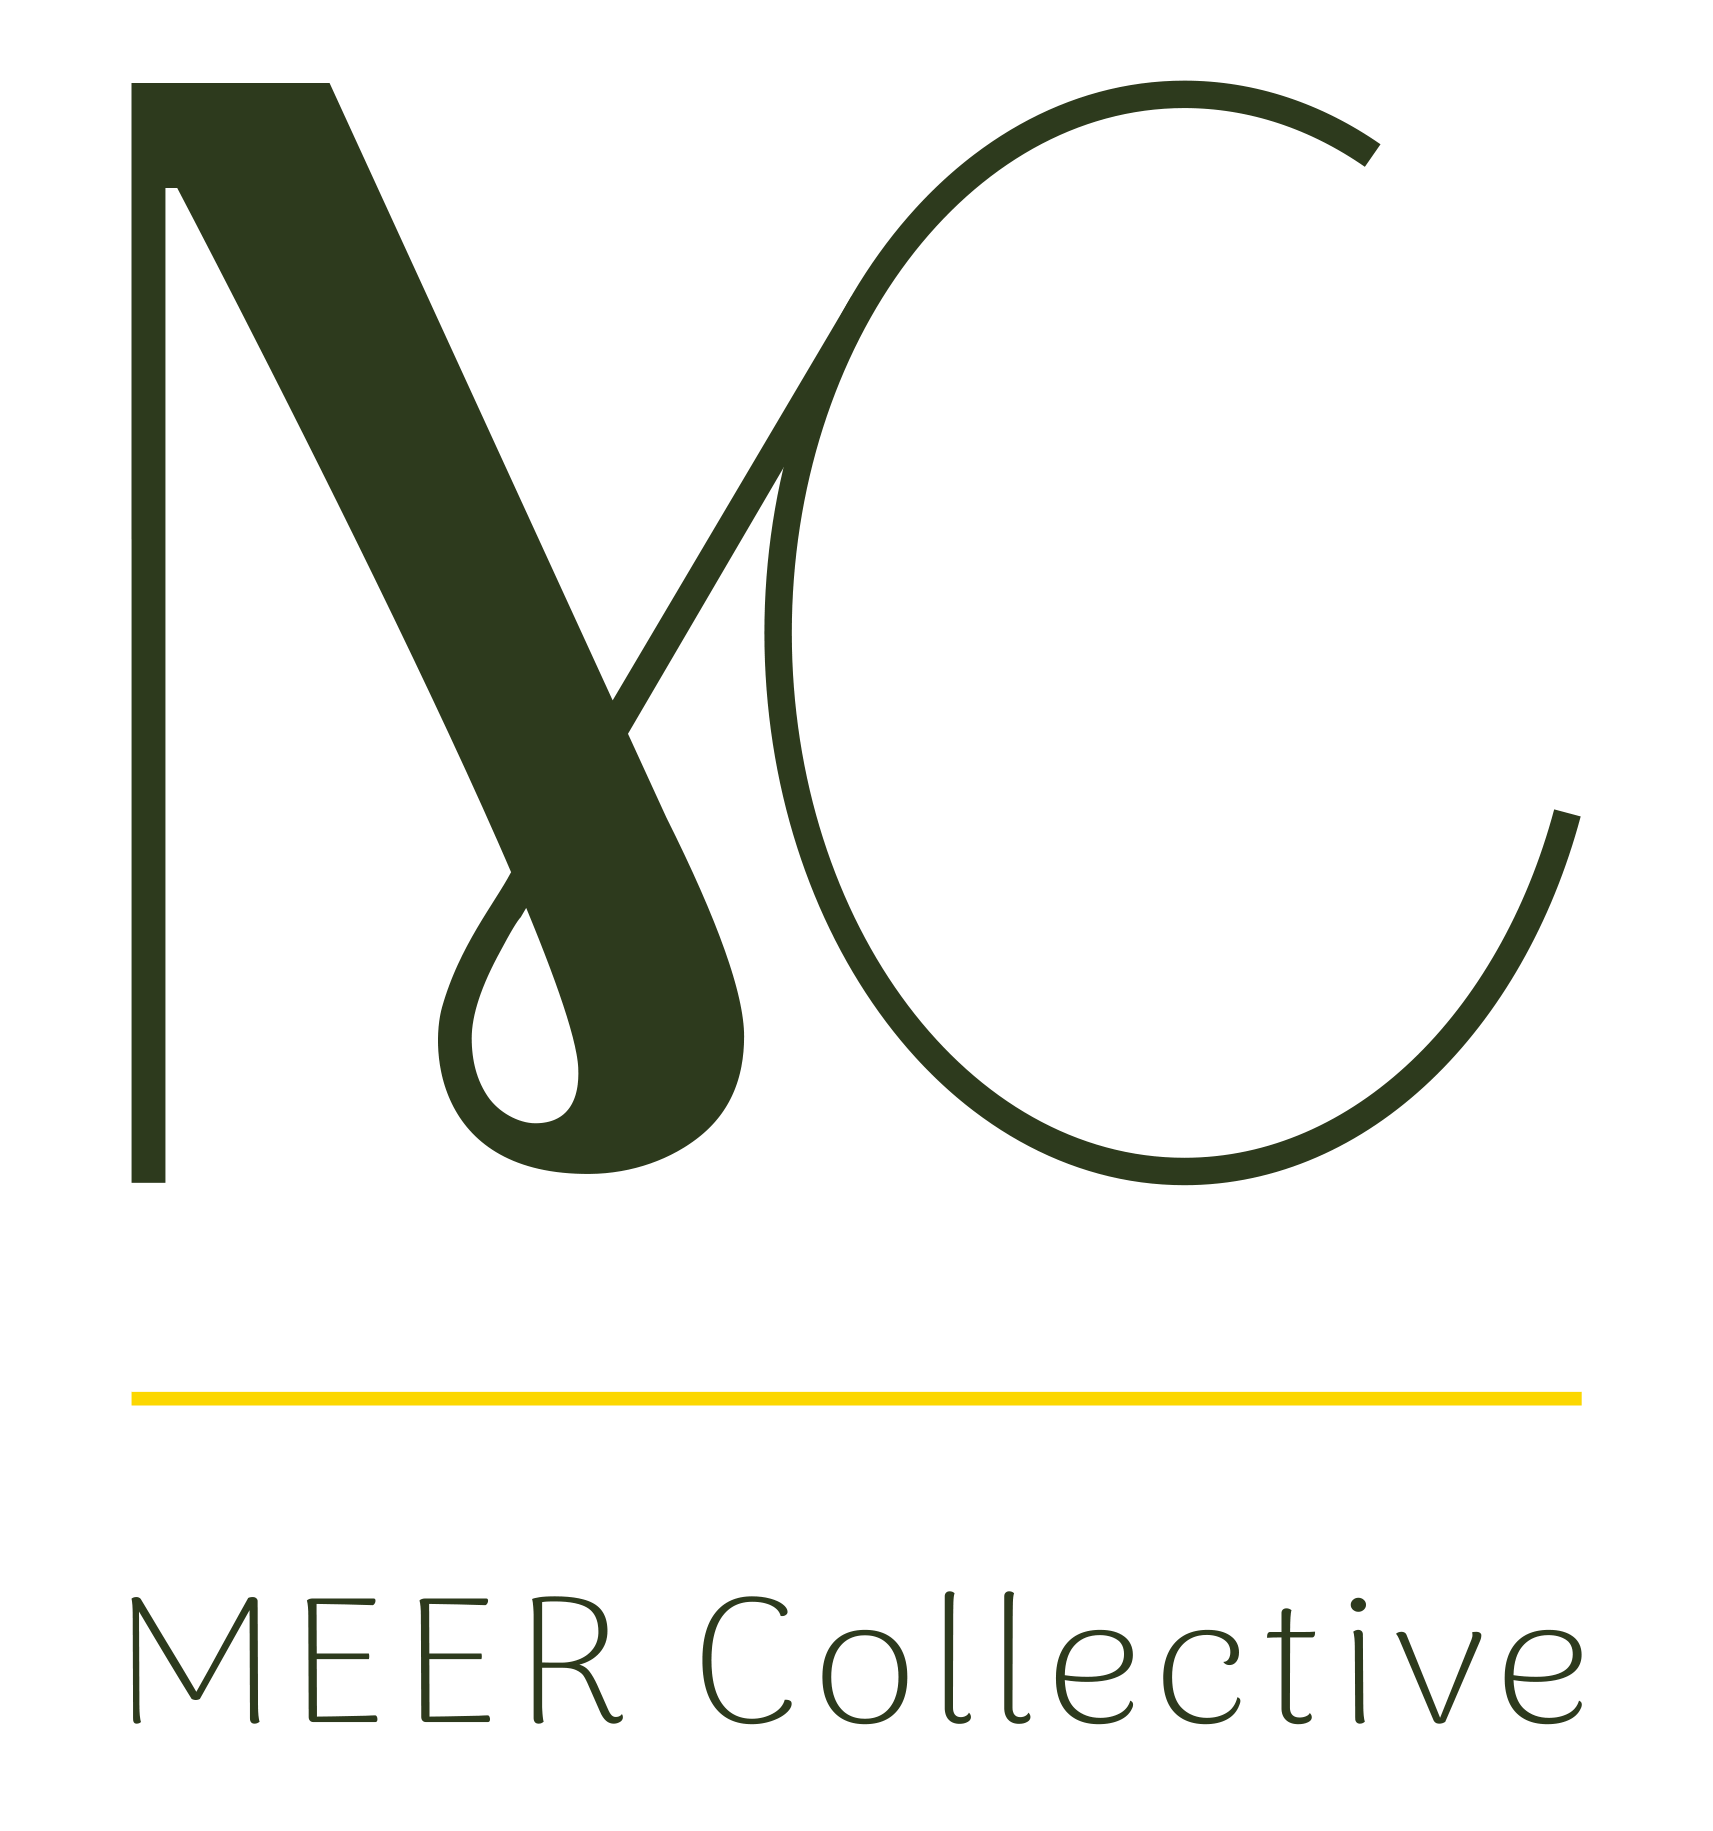 MEER Collective